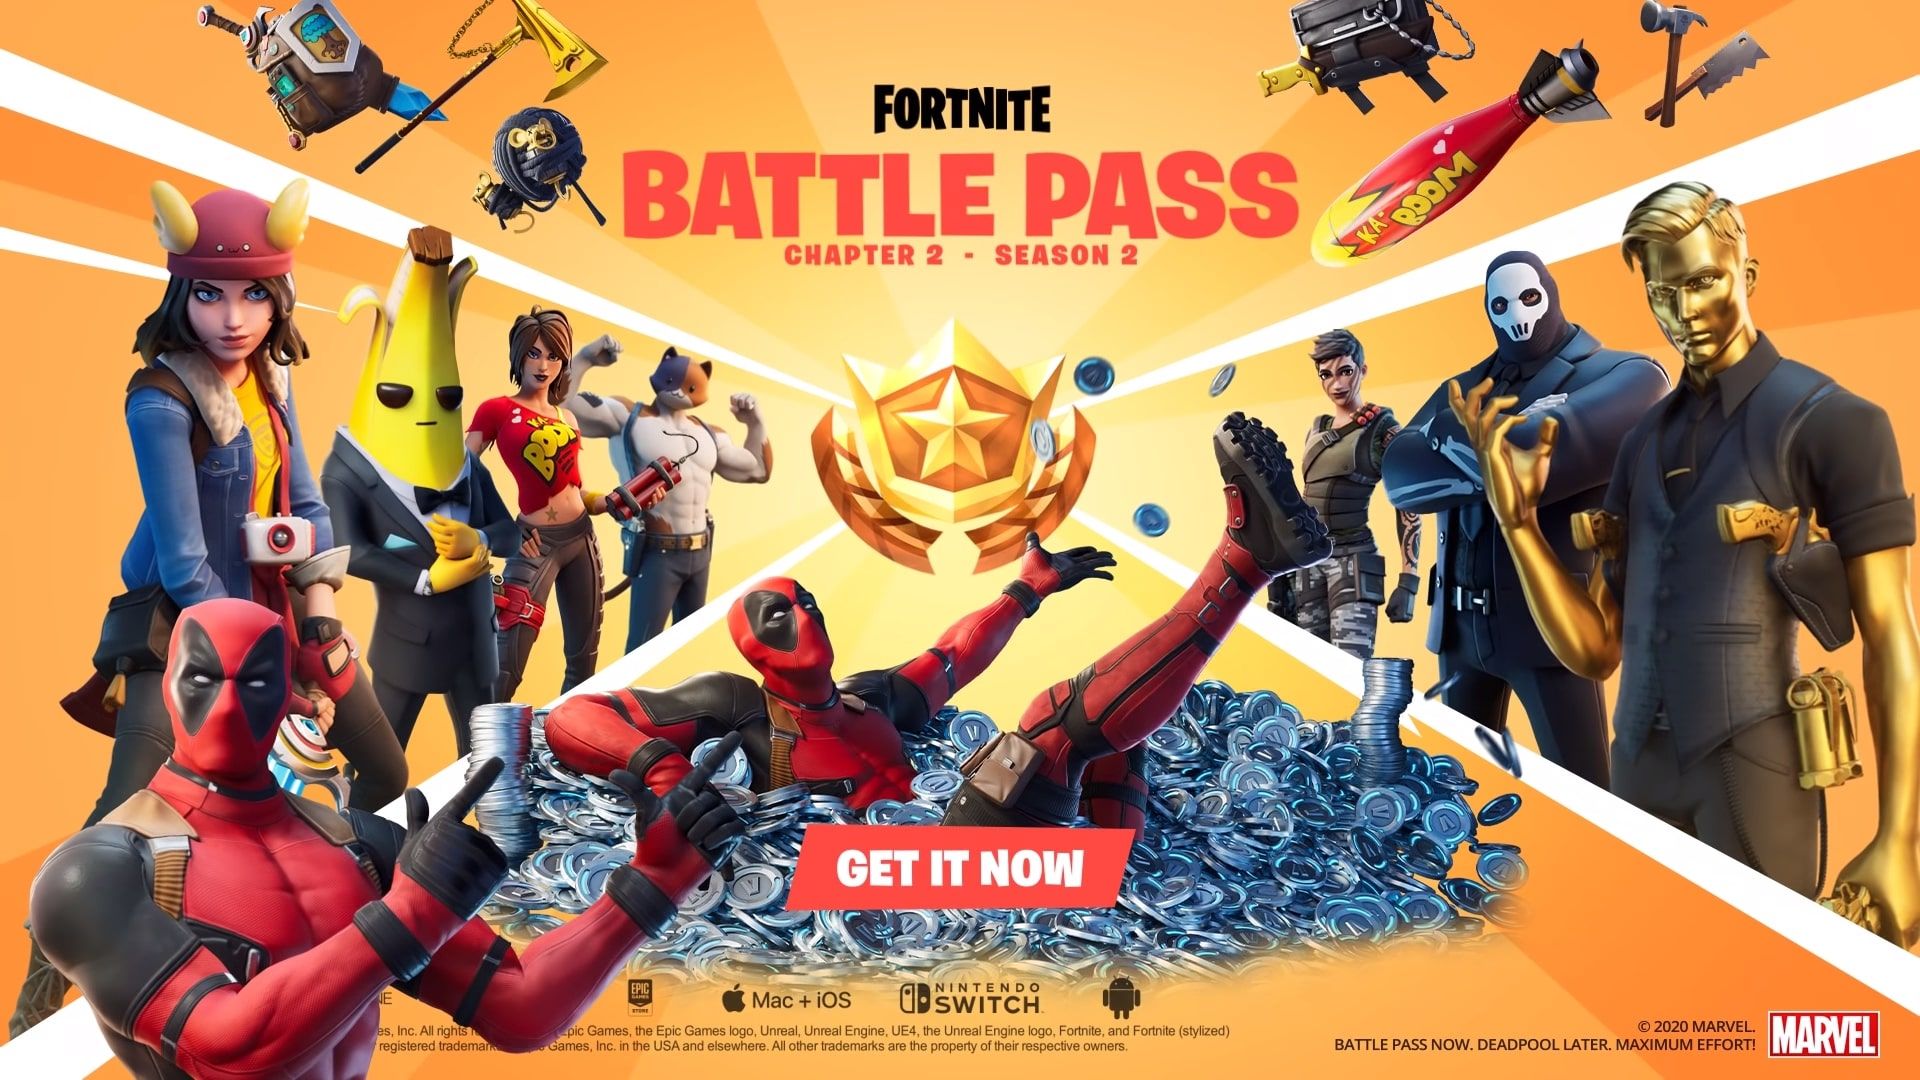 Deadpool joins Fortnite as surprise new battle pass outfit for Season 2